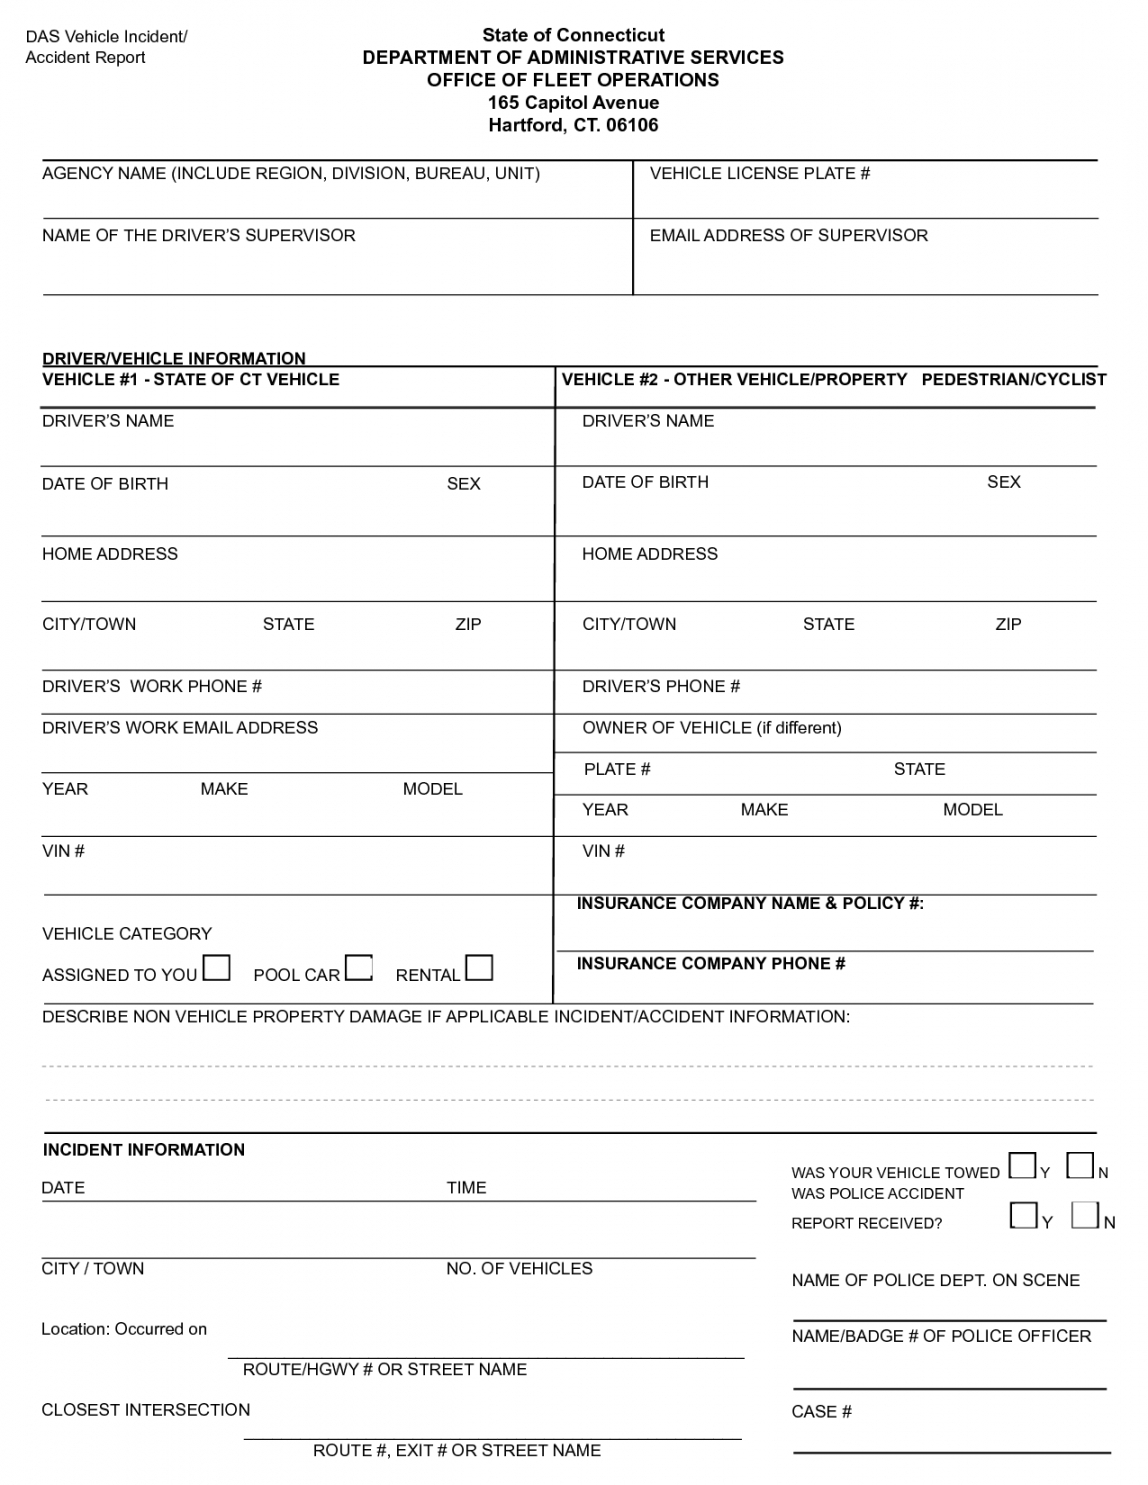 Vehicle Incident Report Template With Regard To Vehicle Accident Report Template